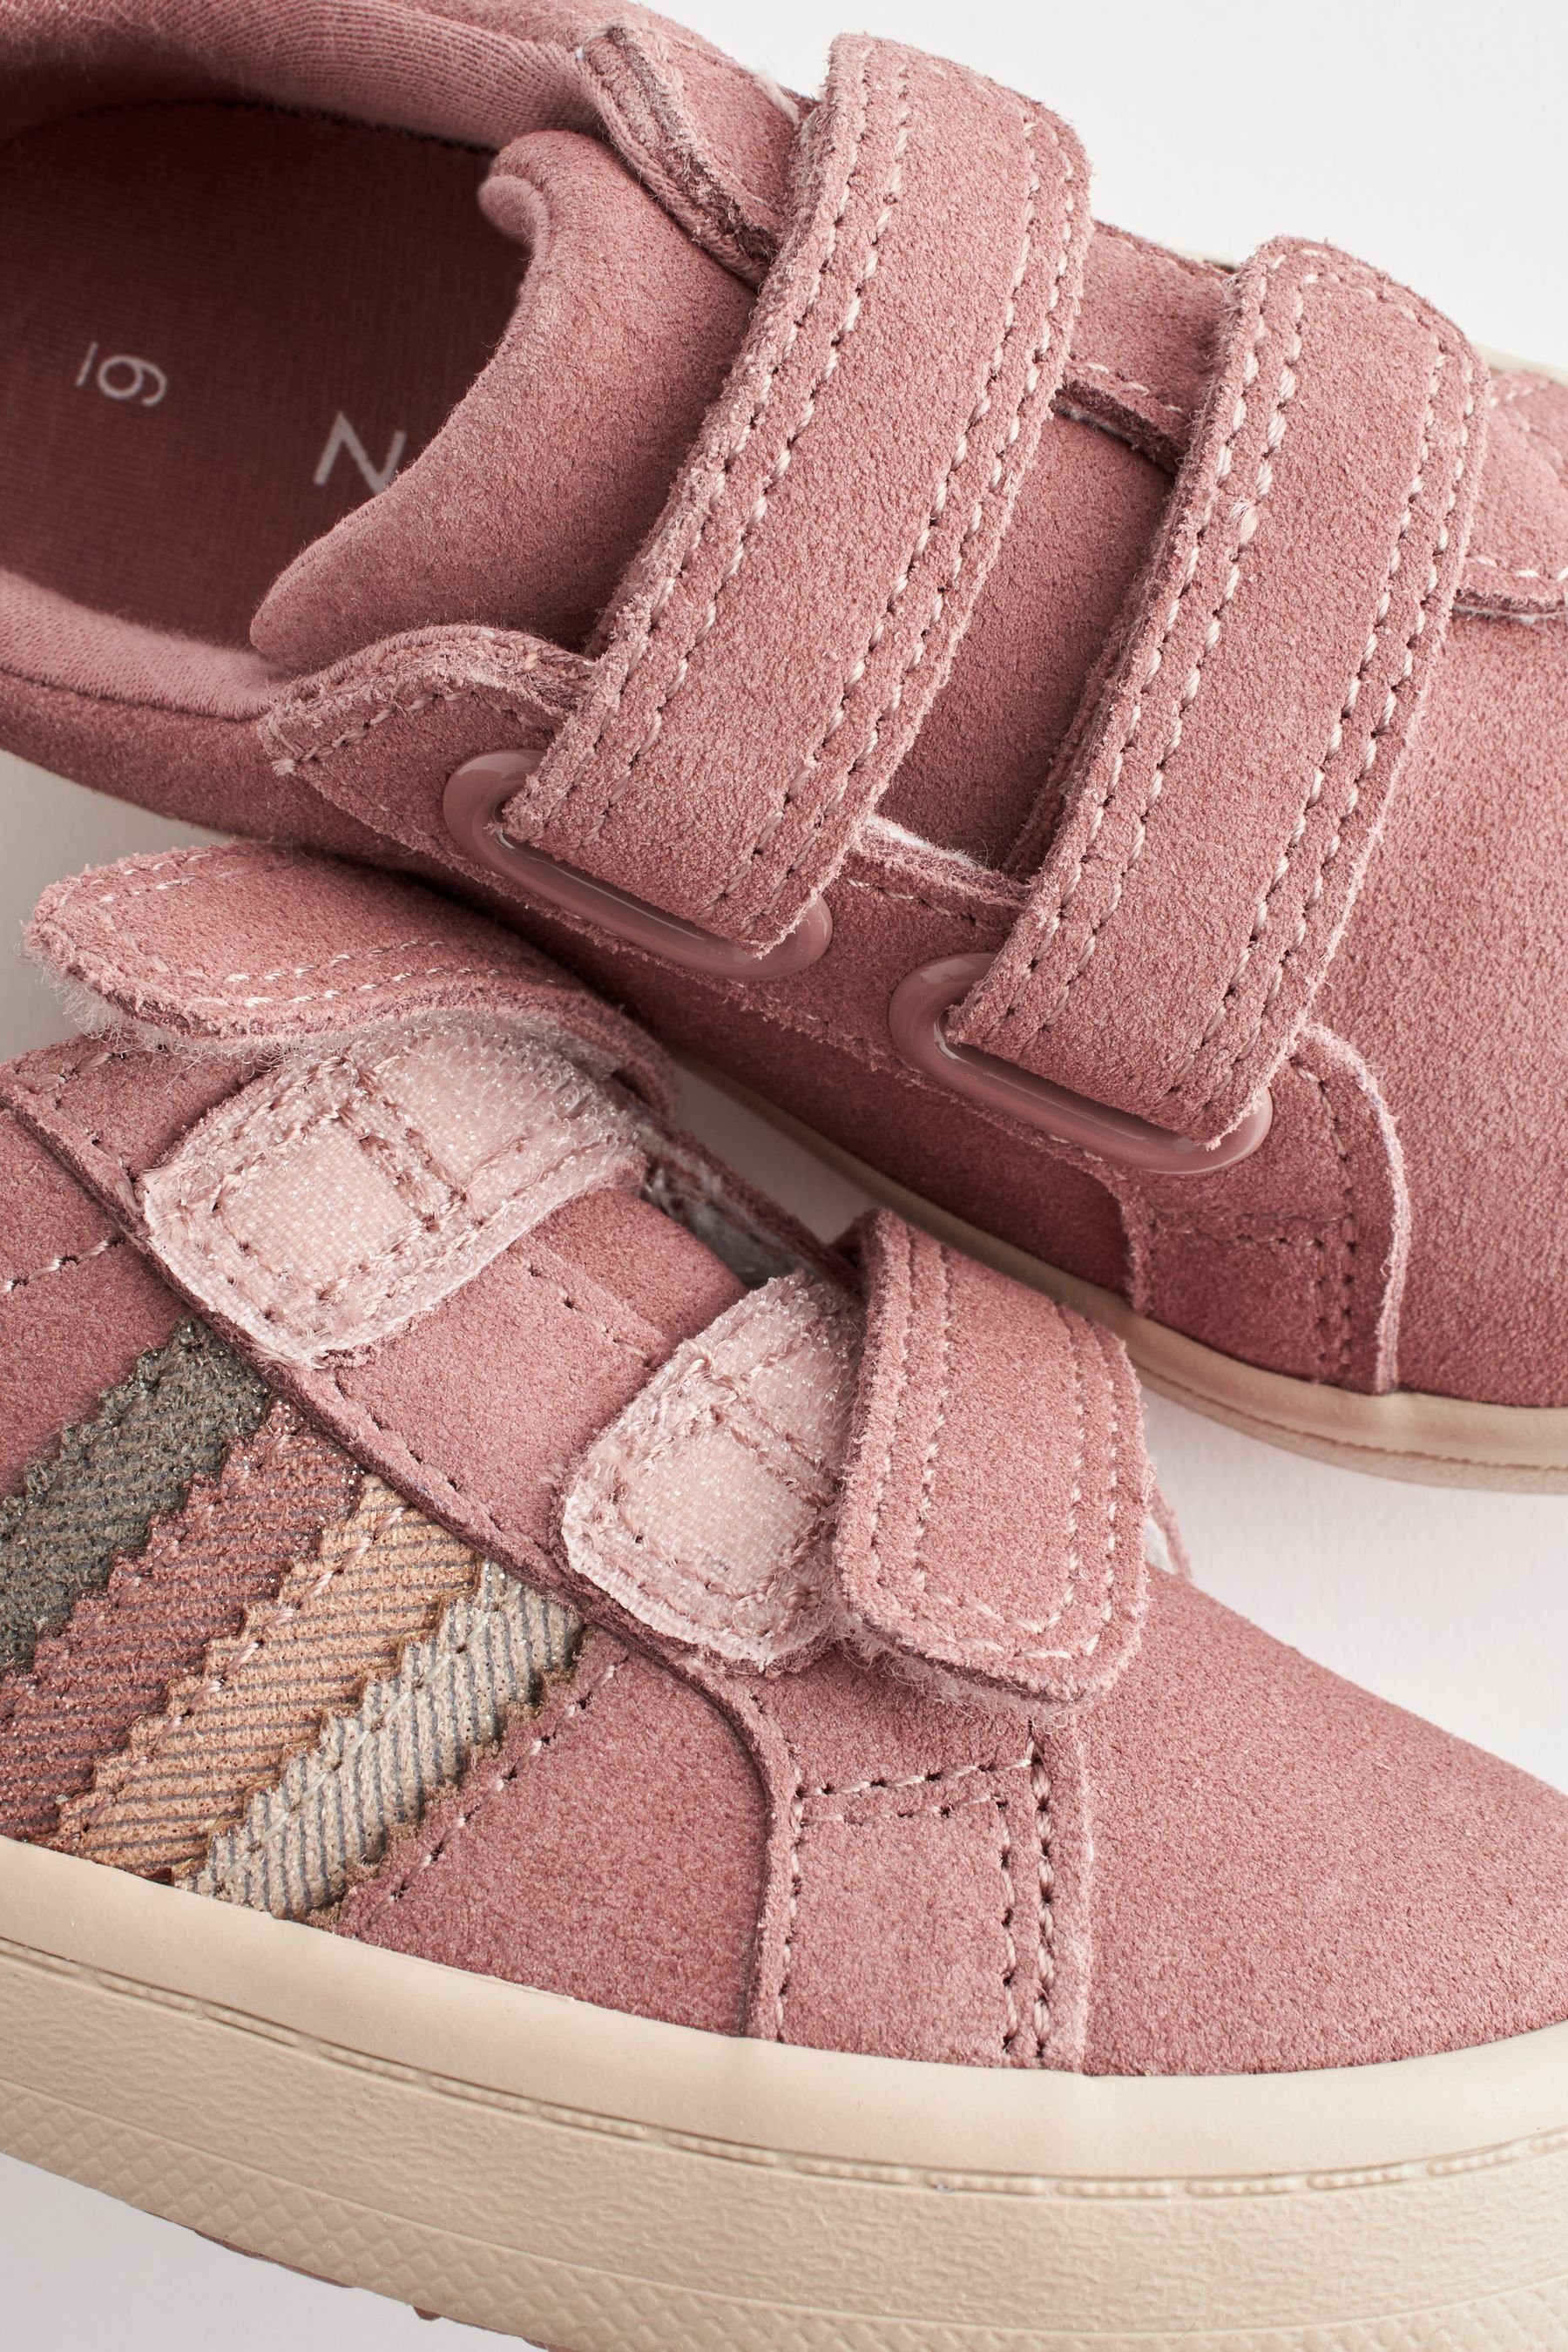 Next Sportschuhe Sneaker Fig Pink (1-tlg) Leather